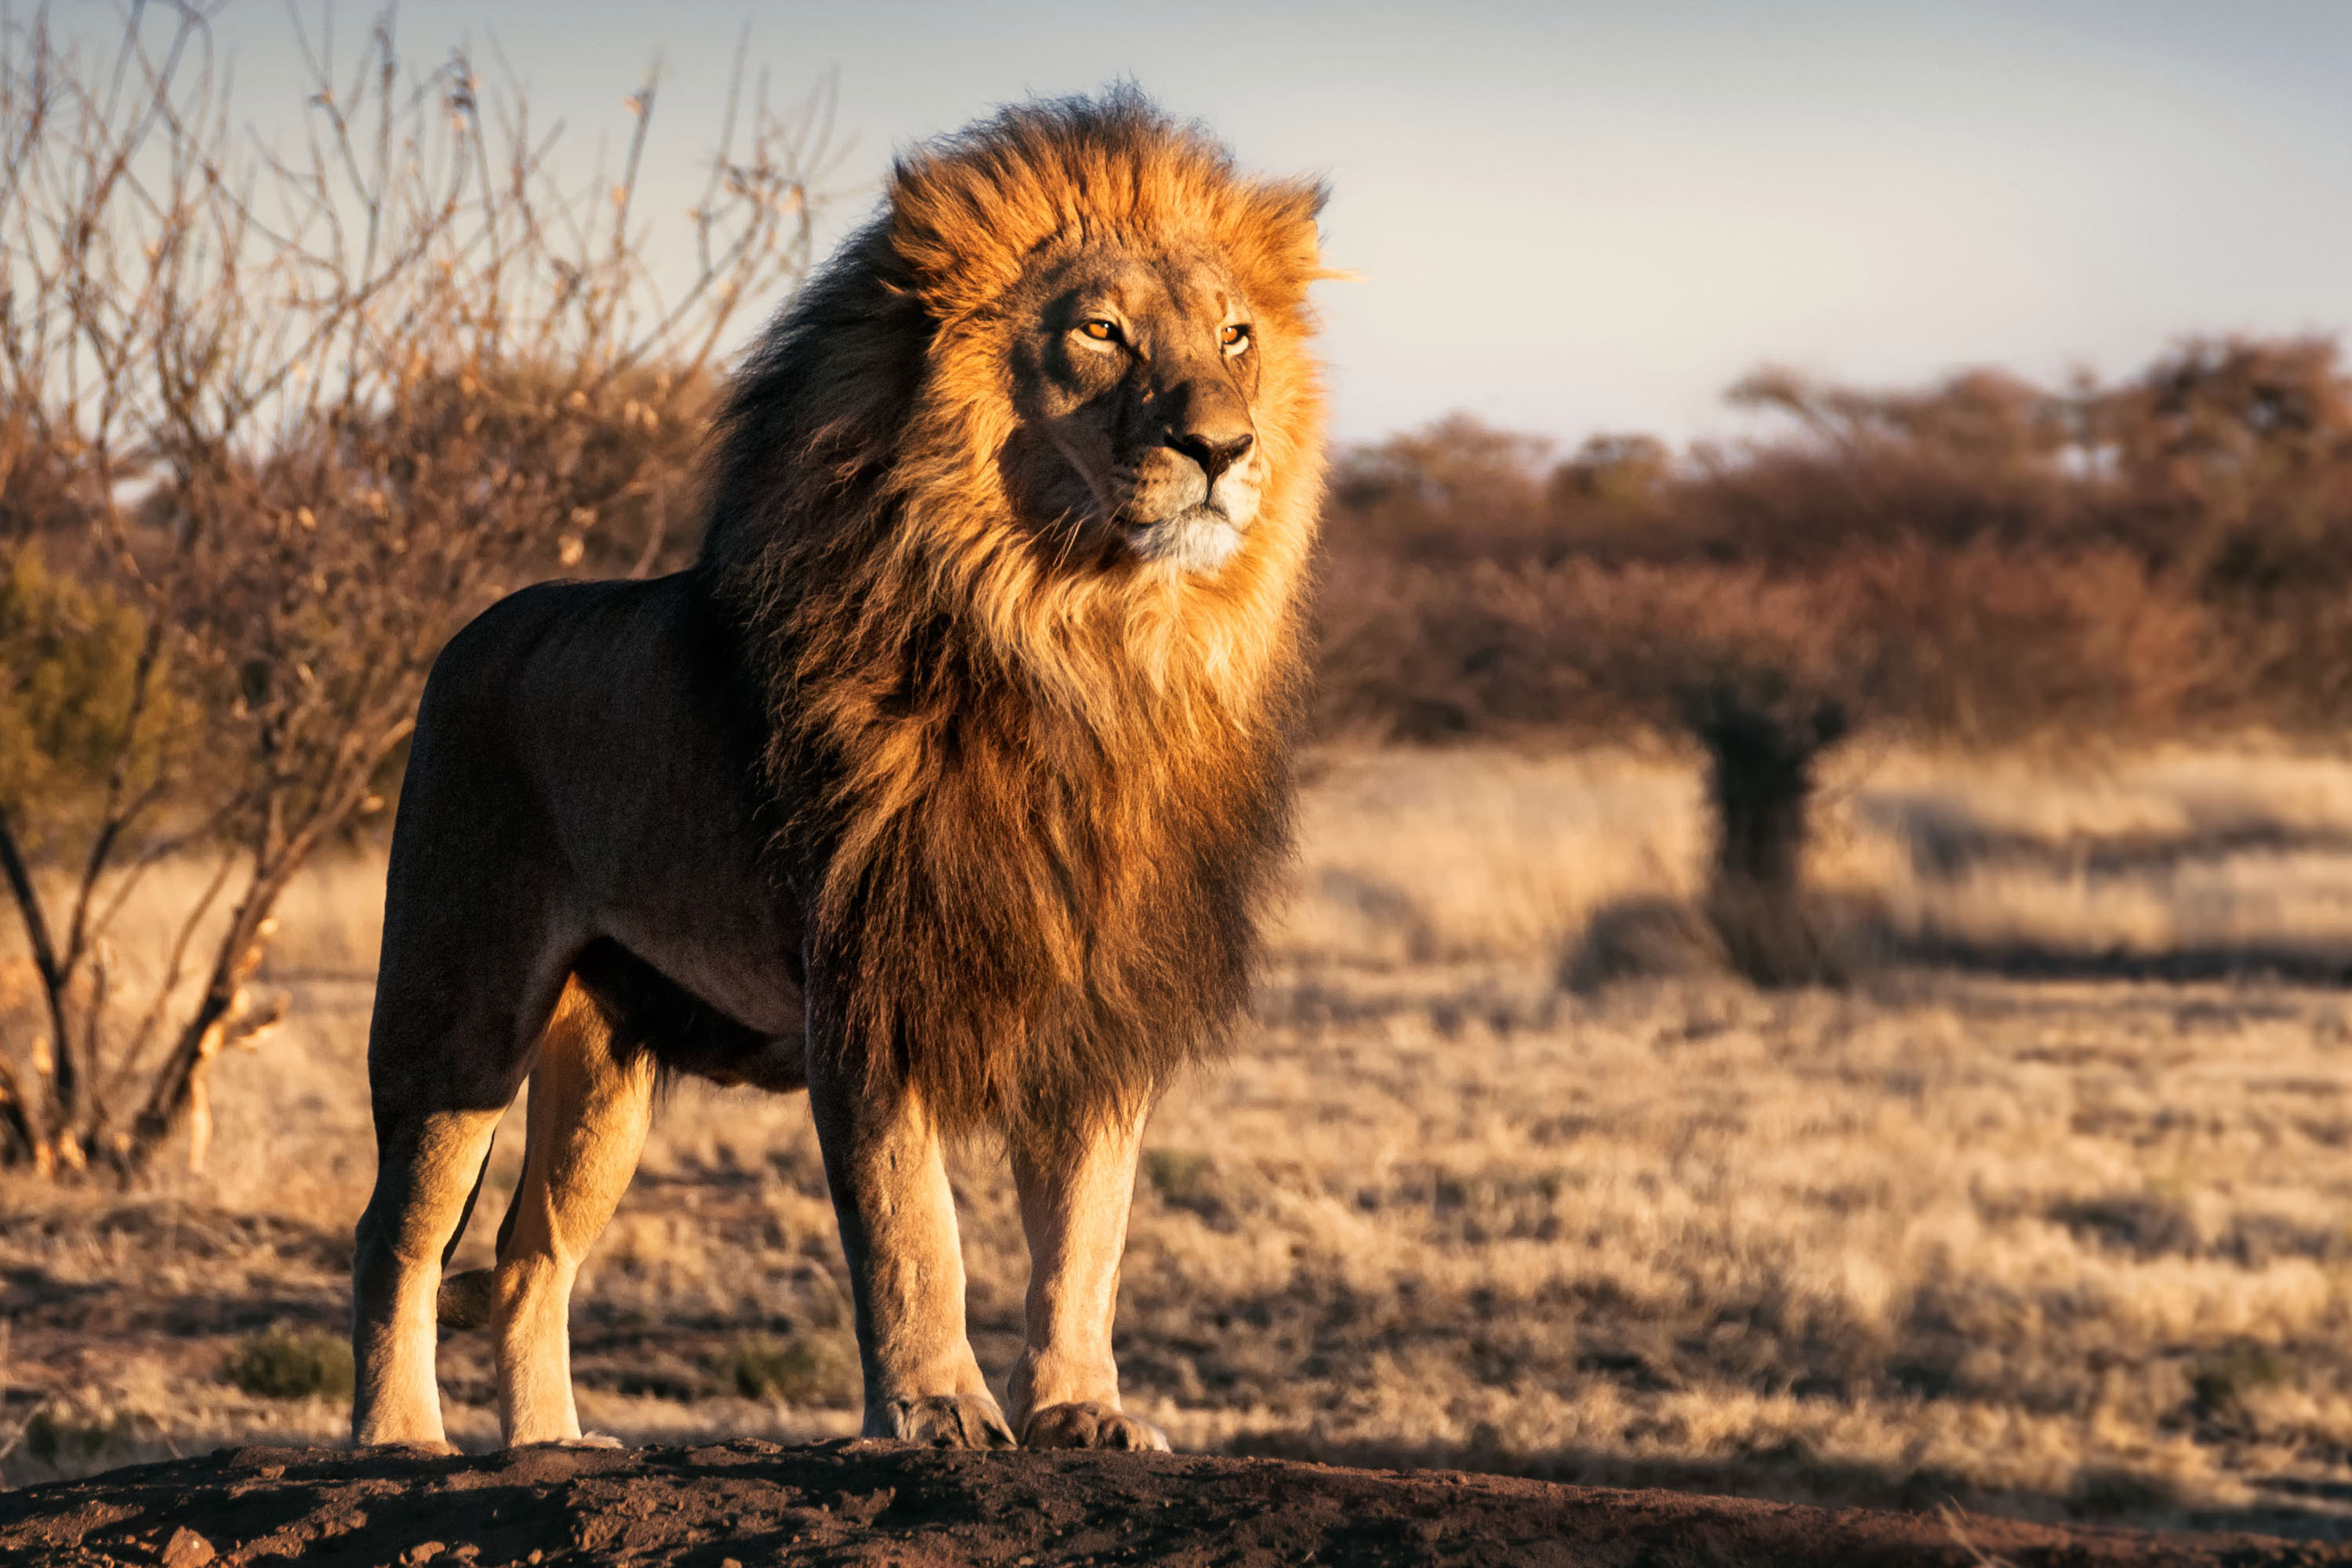 Family IDs severed head of suspected poacher eaten by lions